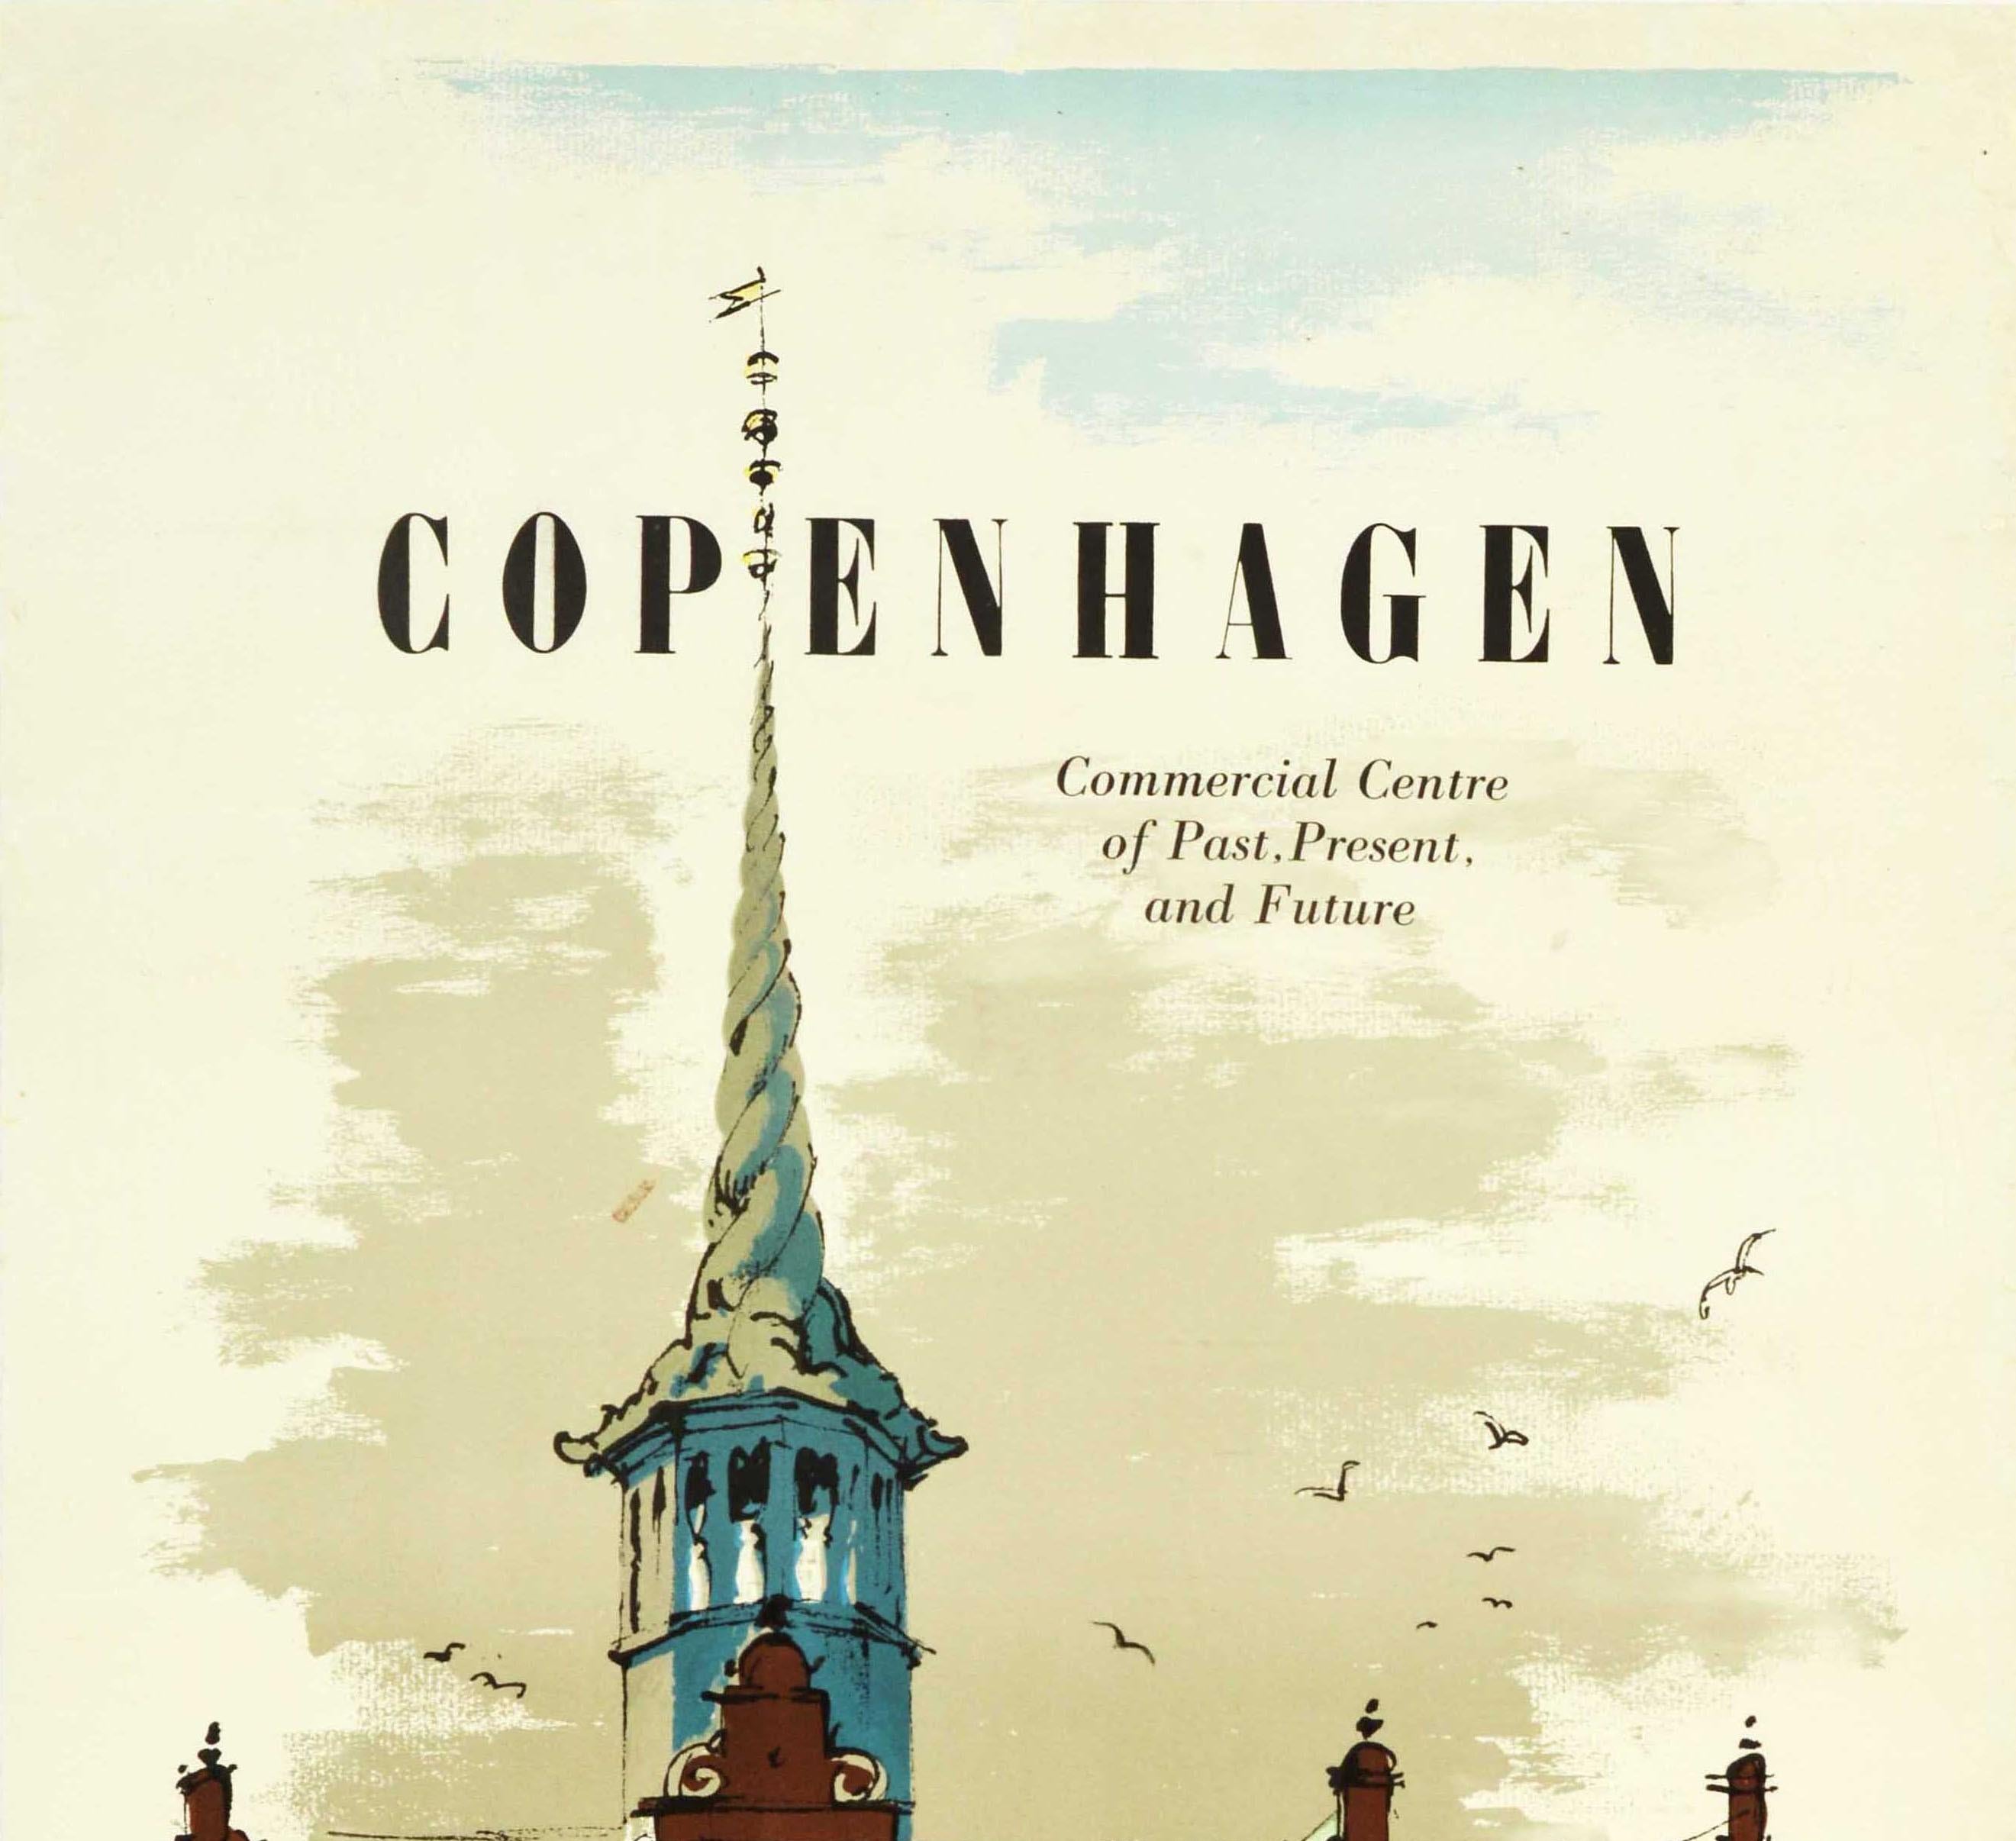 Original vintage travel advertising poster for Copenhagen Commercial Centre of Past, Present, and Future featuring a great design by the Danish artist Des Asmussen (1913-2004) of the historic 17th century Dragon Spire of Borsen stock exchange